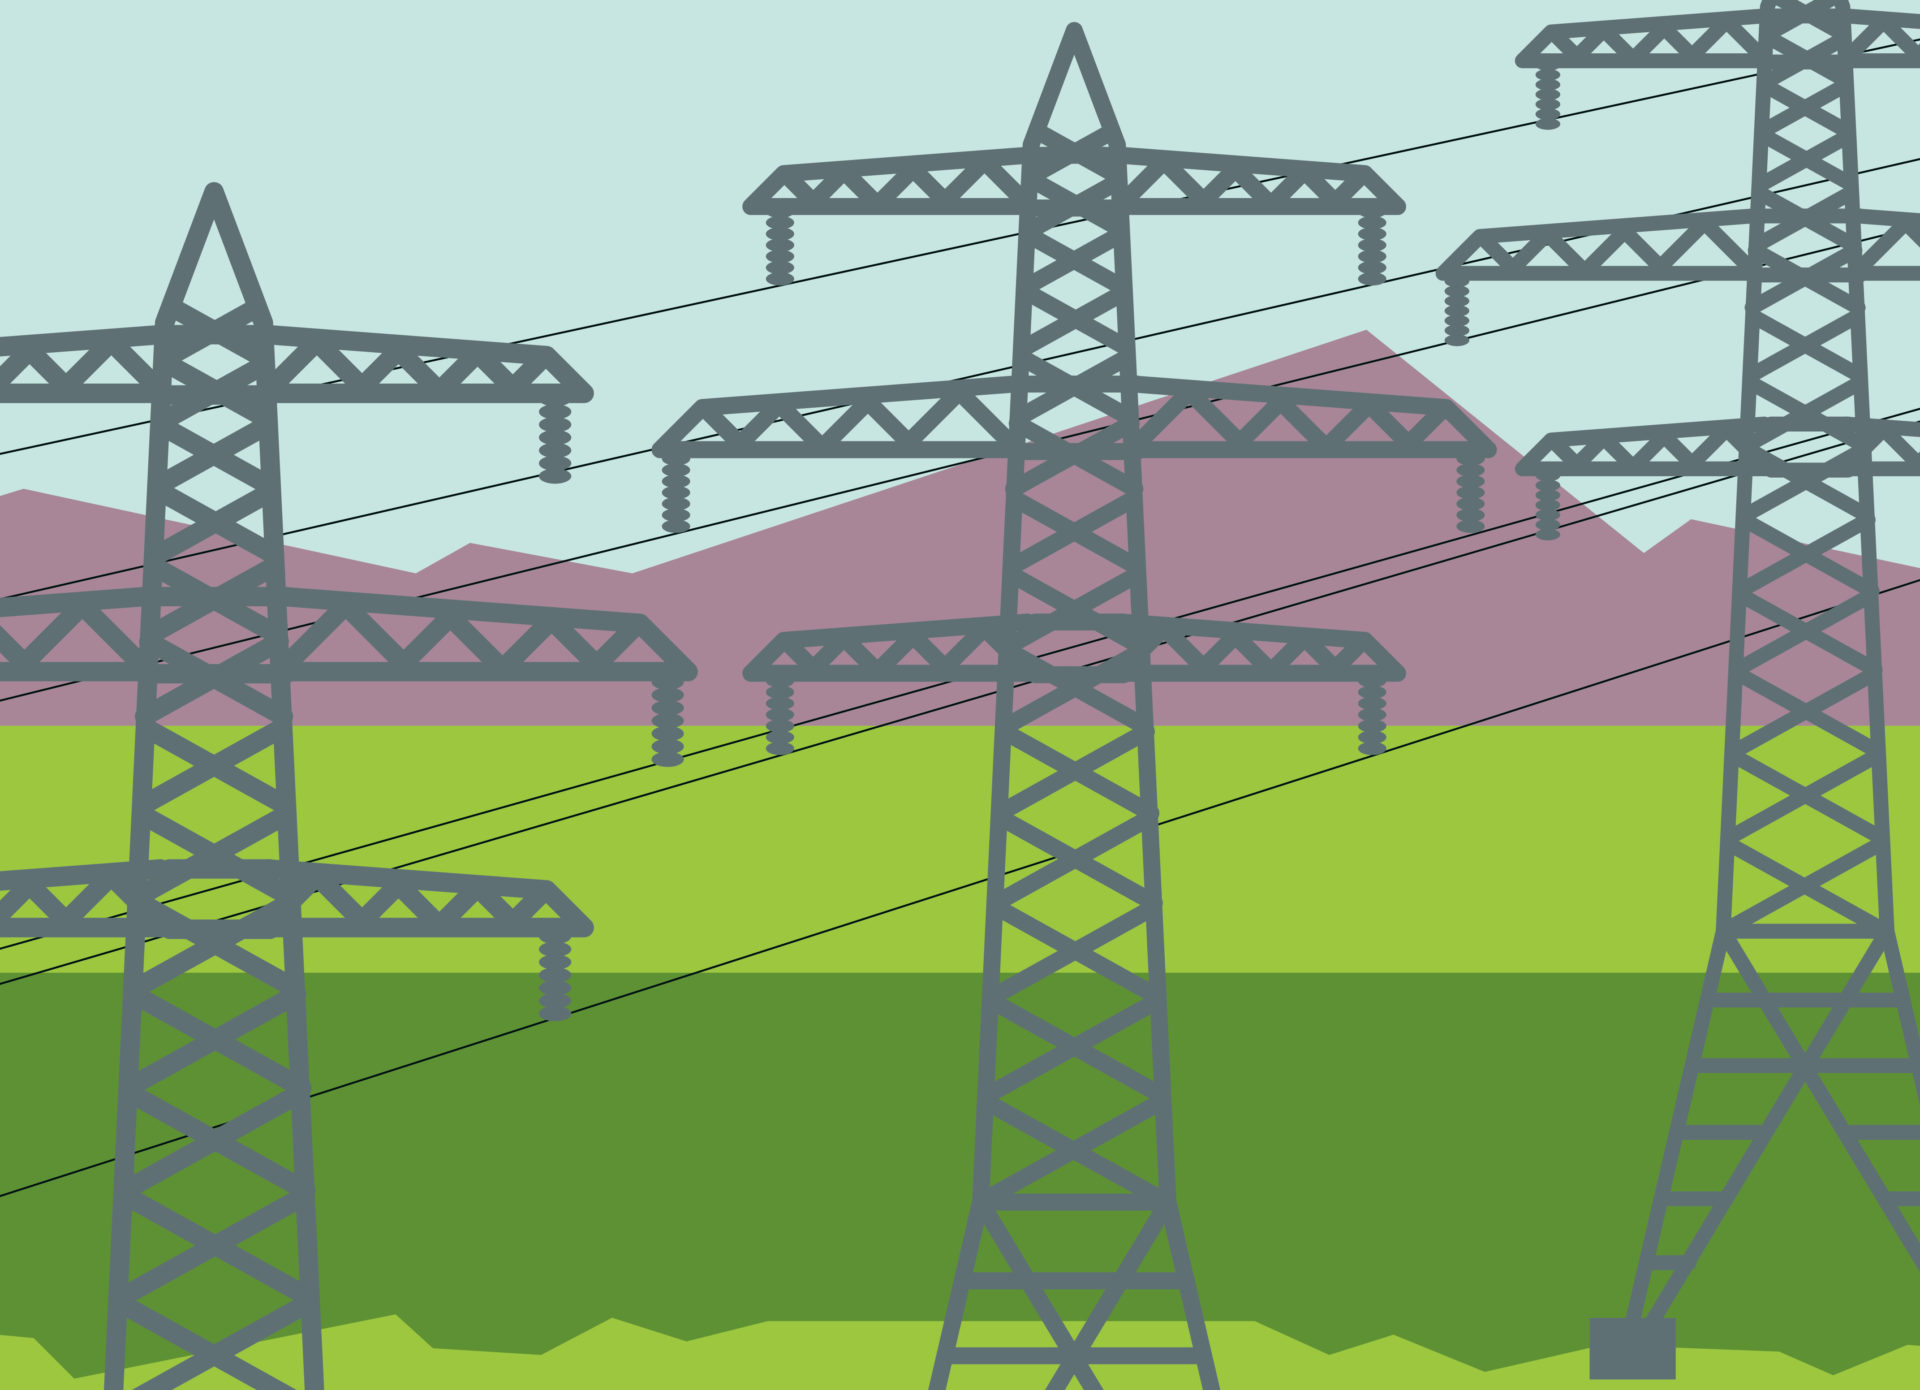 an illustration of three electrical transmission towers